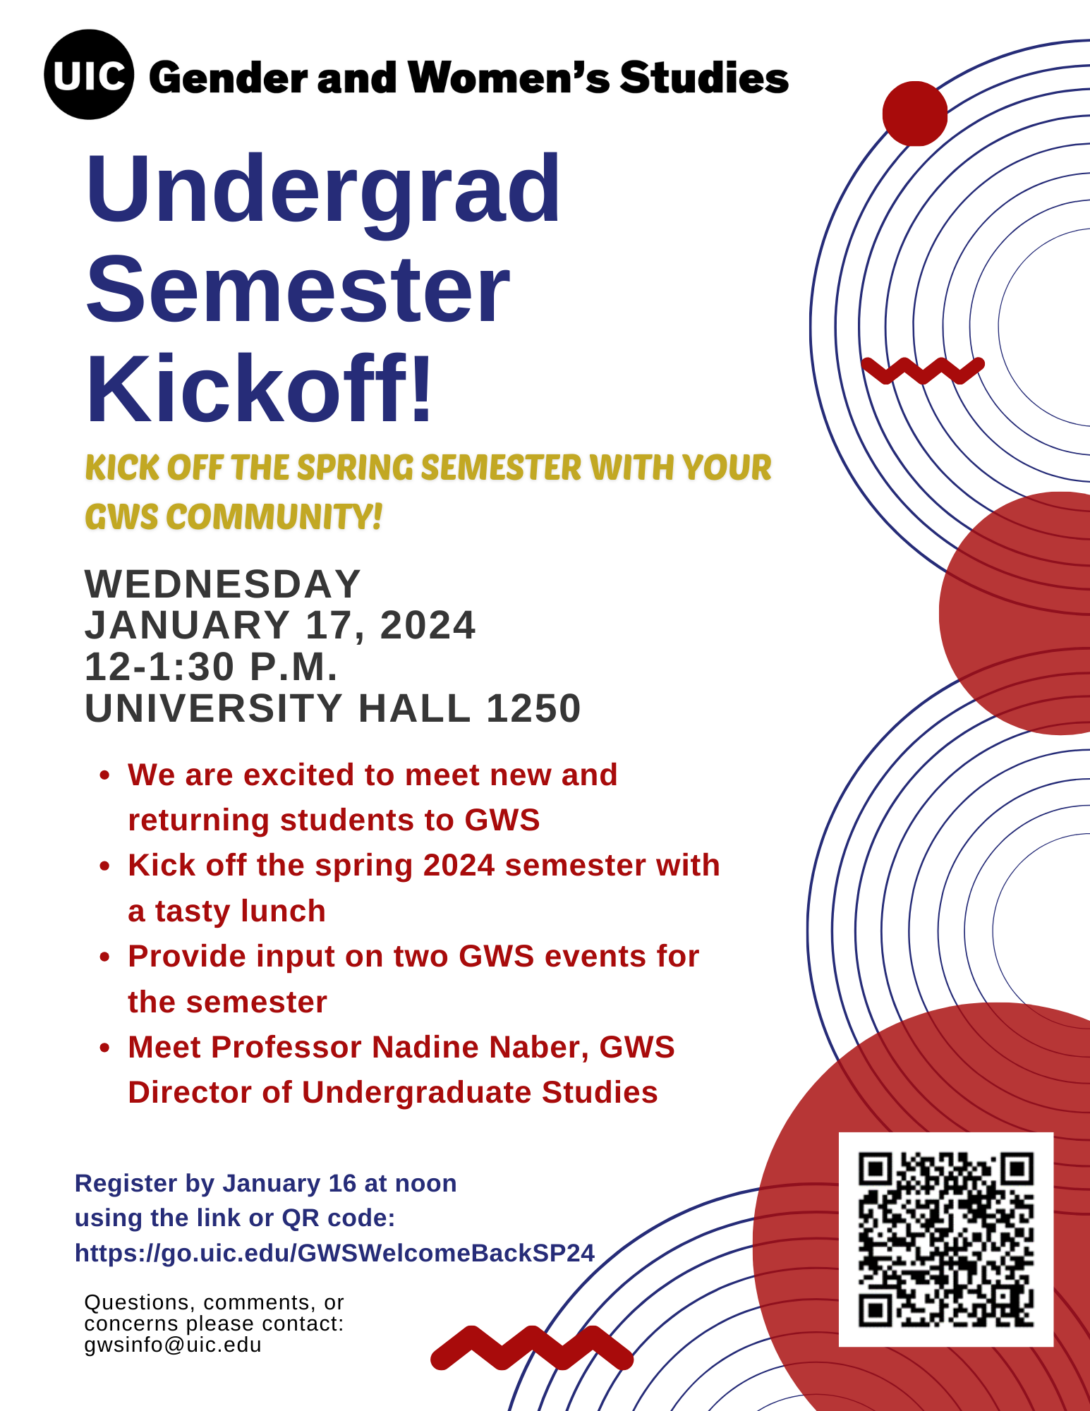 Event flyer with a white background. Blue concentric circles appear down the right side of the flyer and in the bottom right corner. Solid red circles and squiggly red designs of varying sizes are interspersed with the blue circles. In the bottom right corner is a black and white QR code for registration. The event details appears on the flyer in blue, yellow, black, and red text.